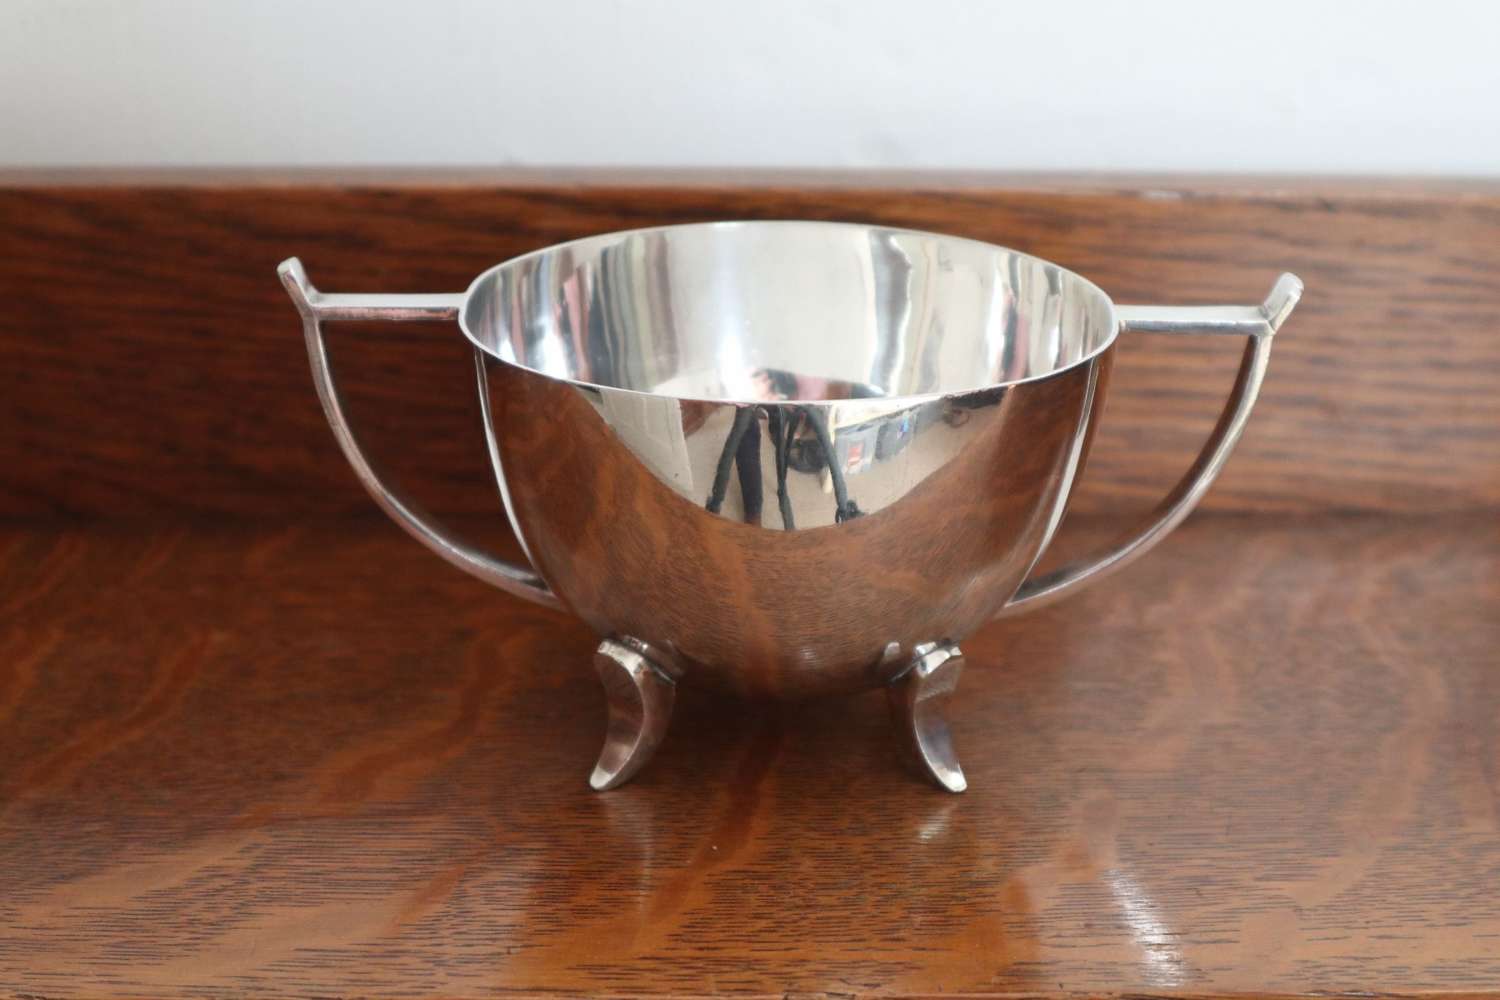 Arts & Crafts double handled silver-plated sugar bowl c.1906.